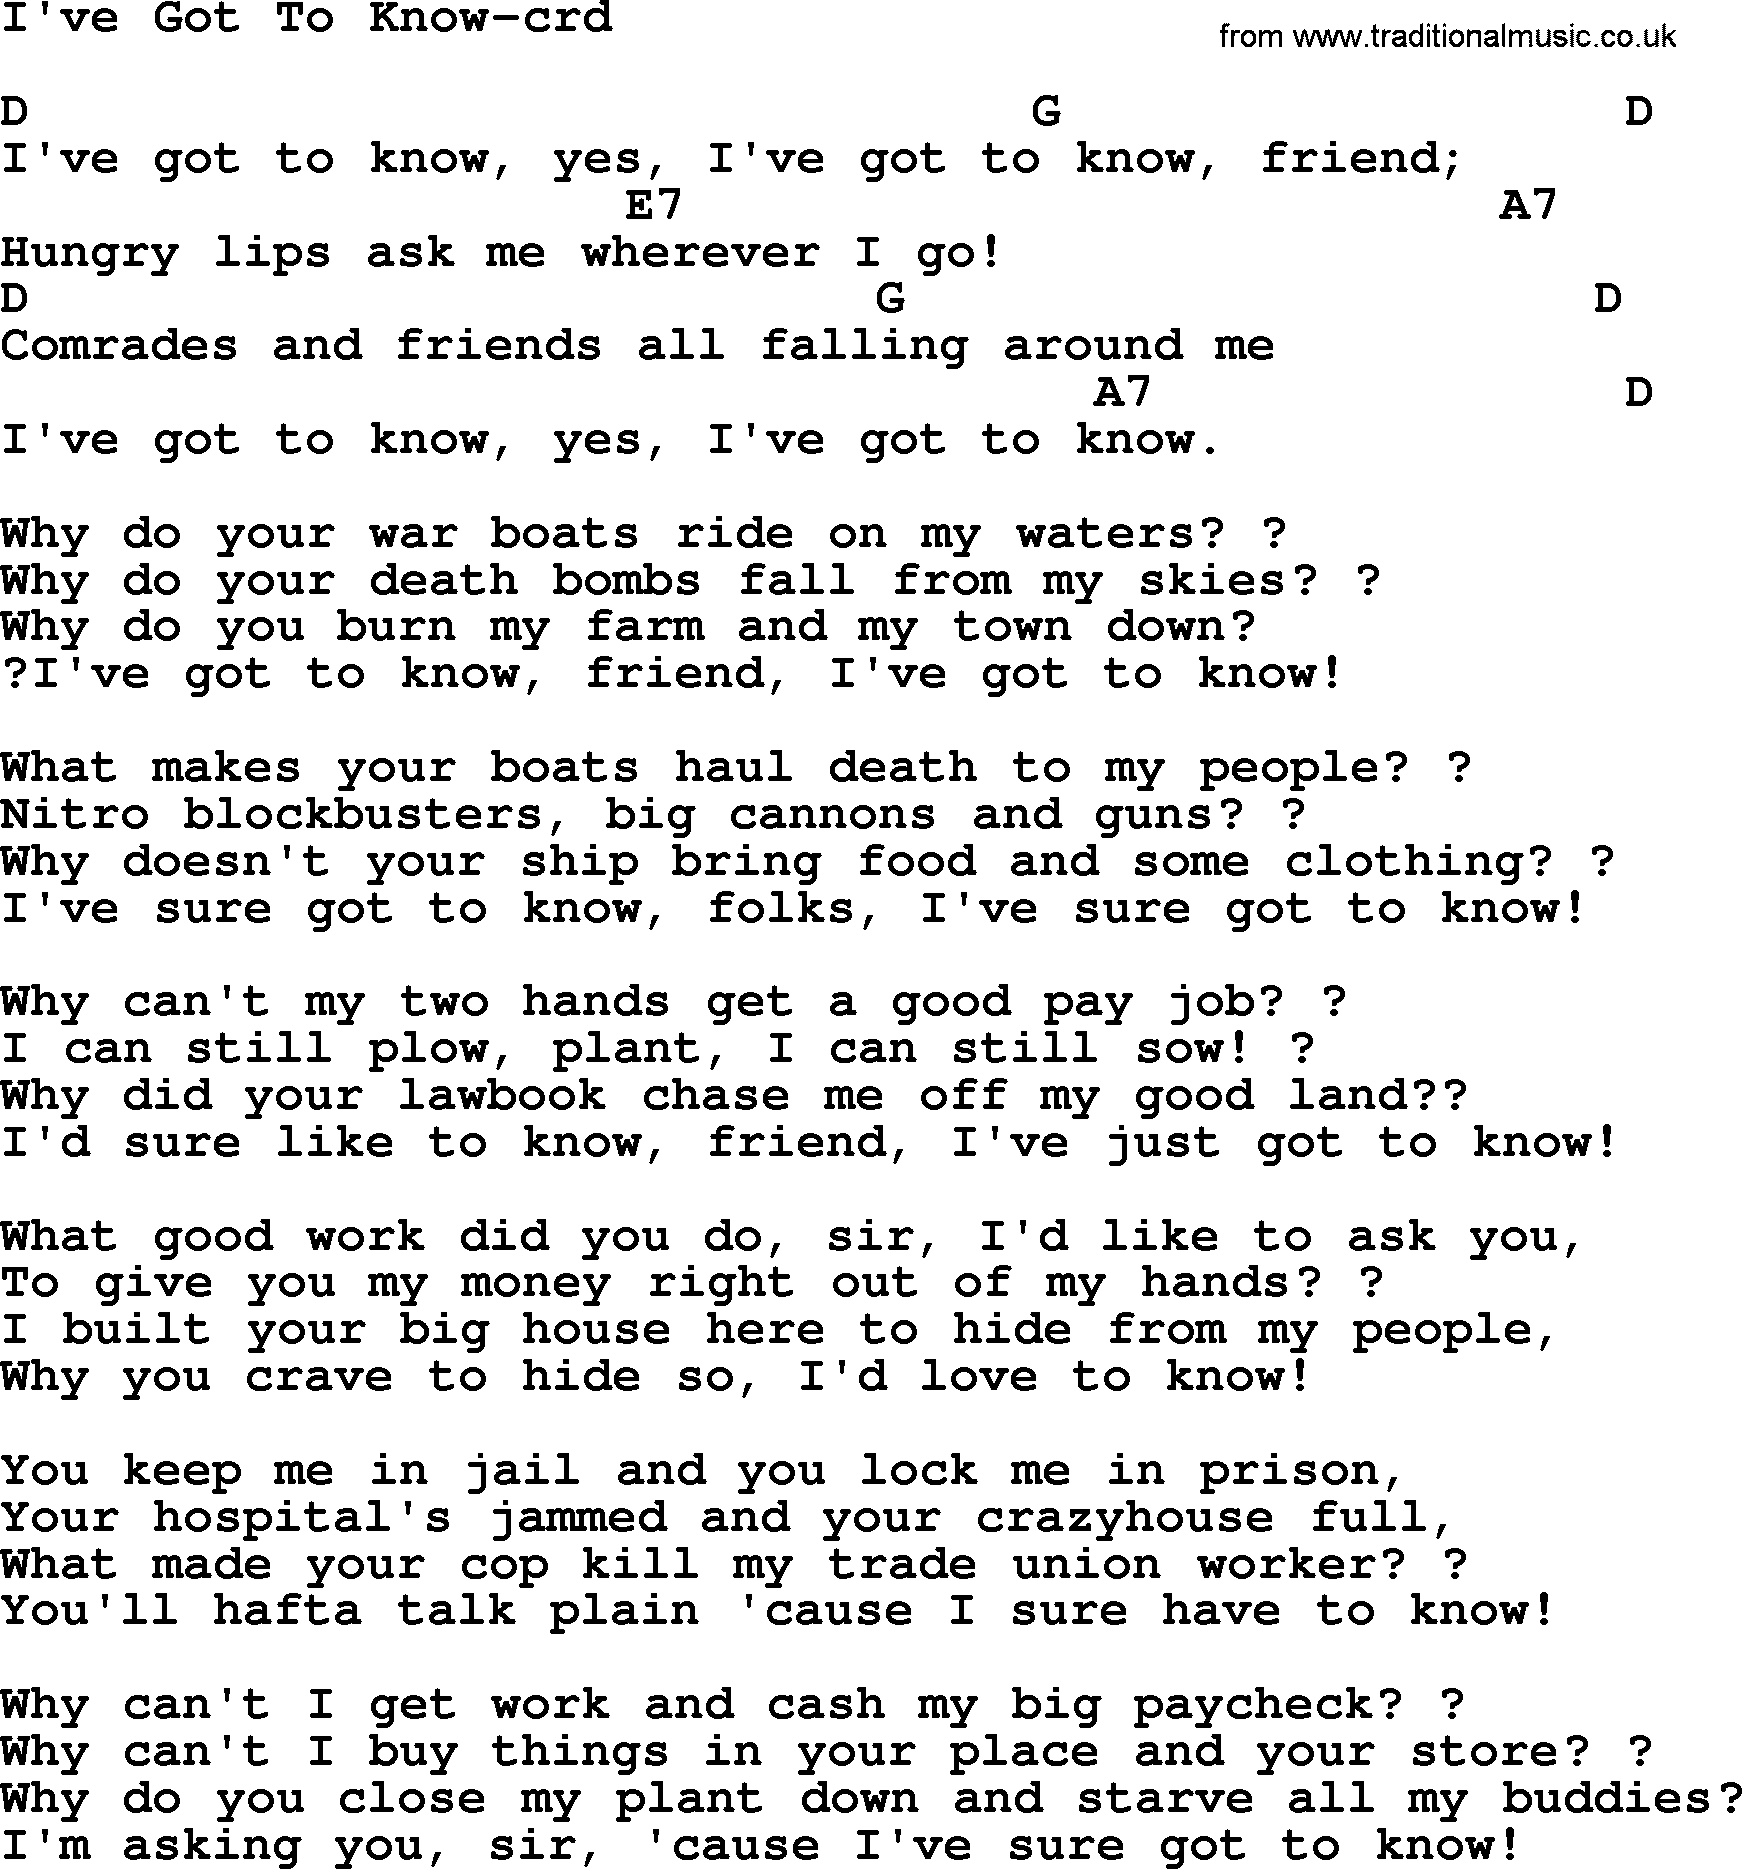 Woody Guthrie song I've Got To Know lyrics and chords